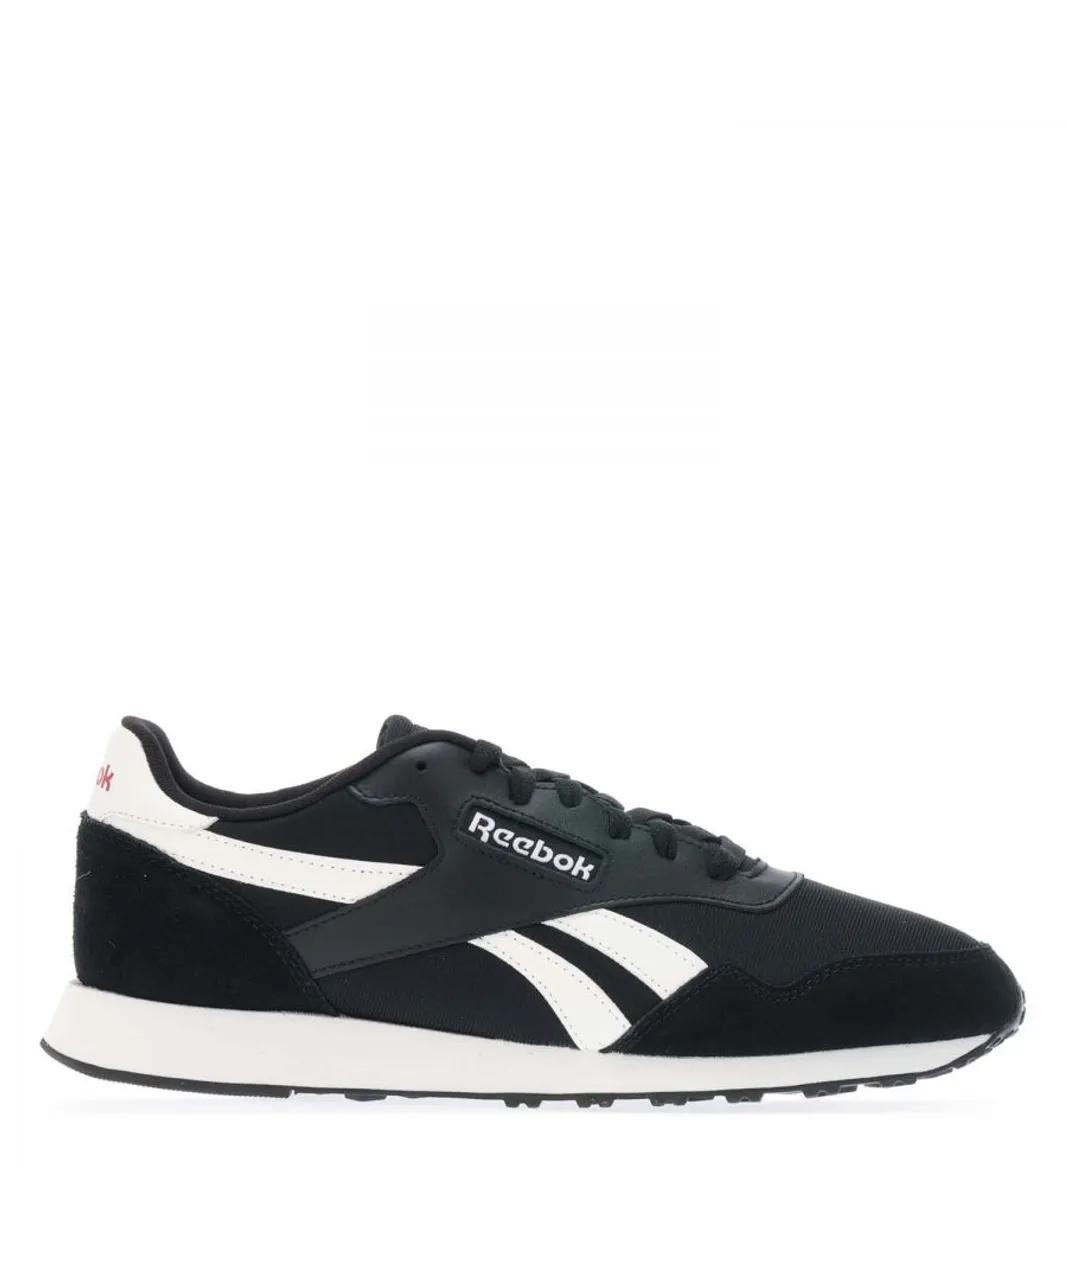 Reebok Mens Royal Ultra Trainers in Black Leather (archived)